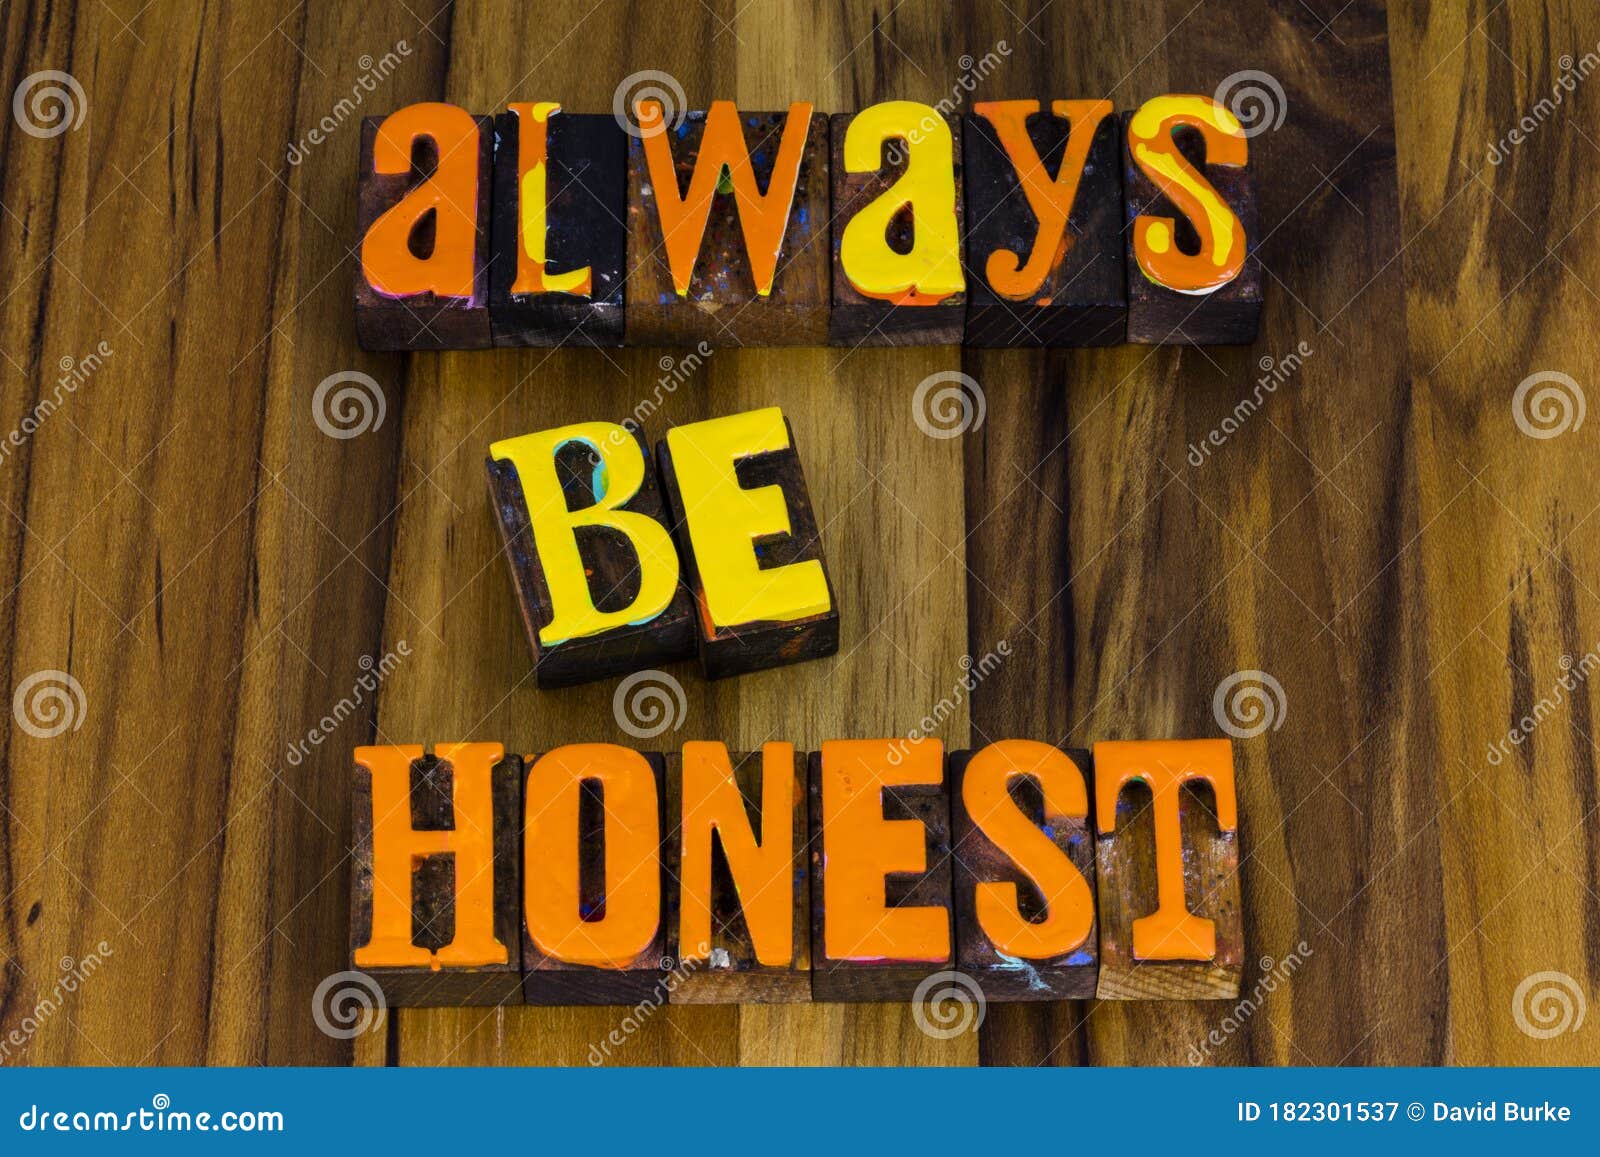 be honest and trustworthy